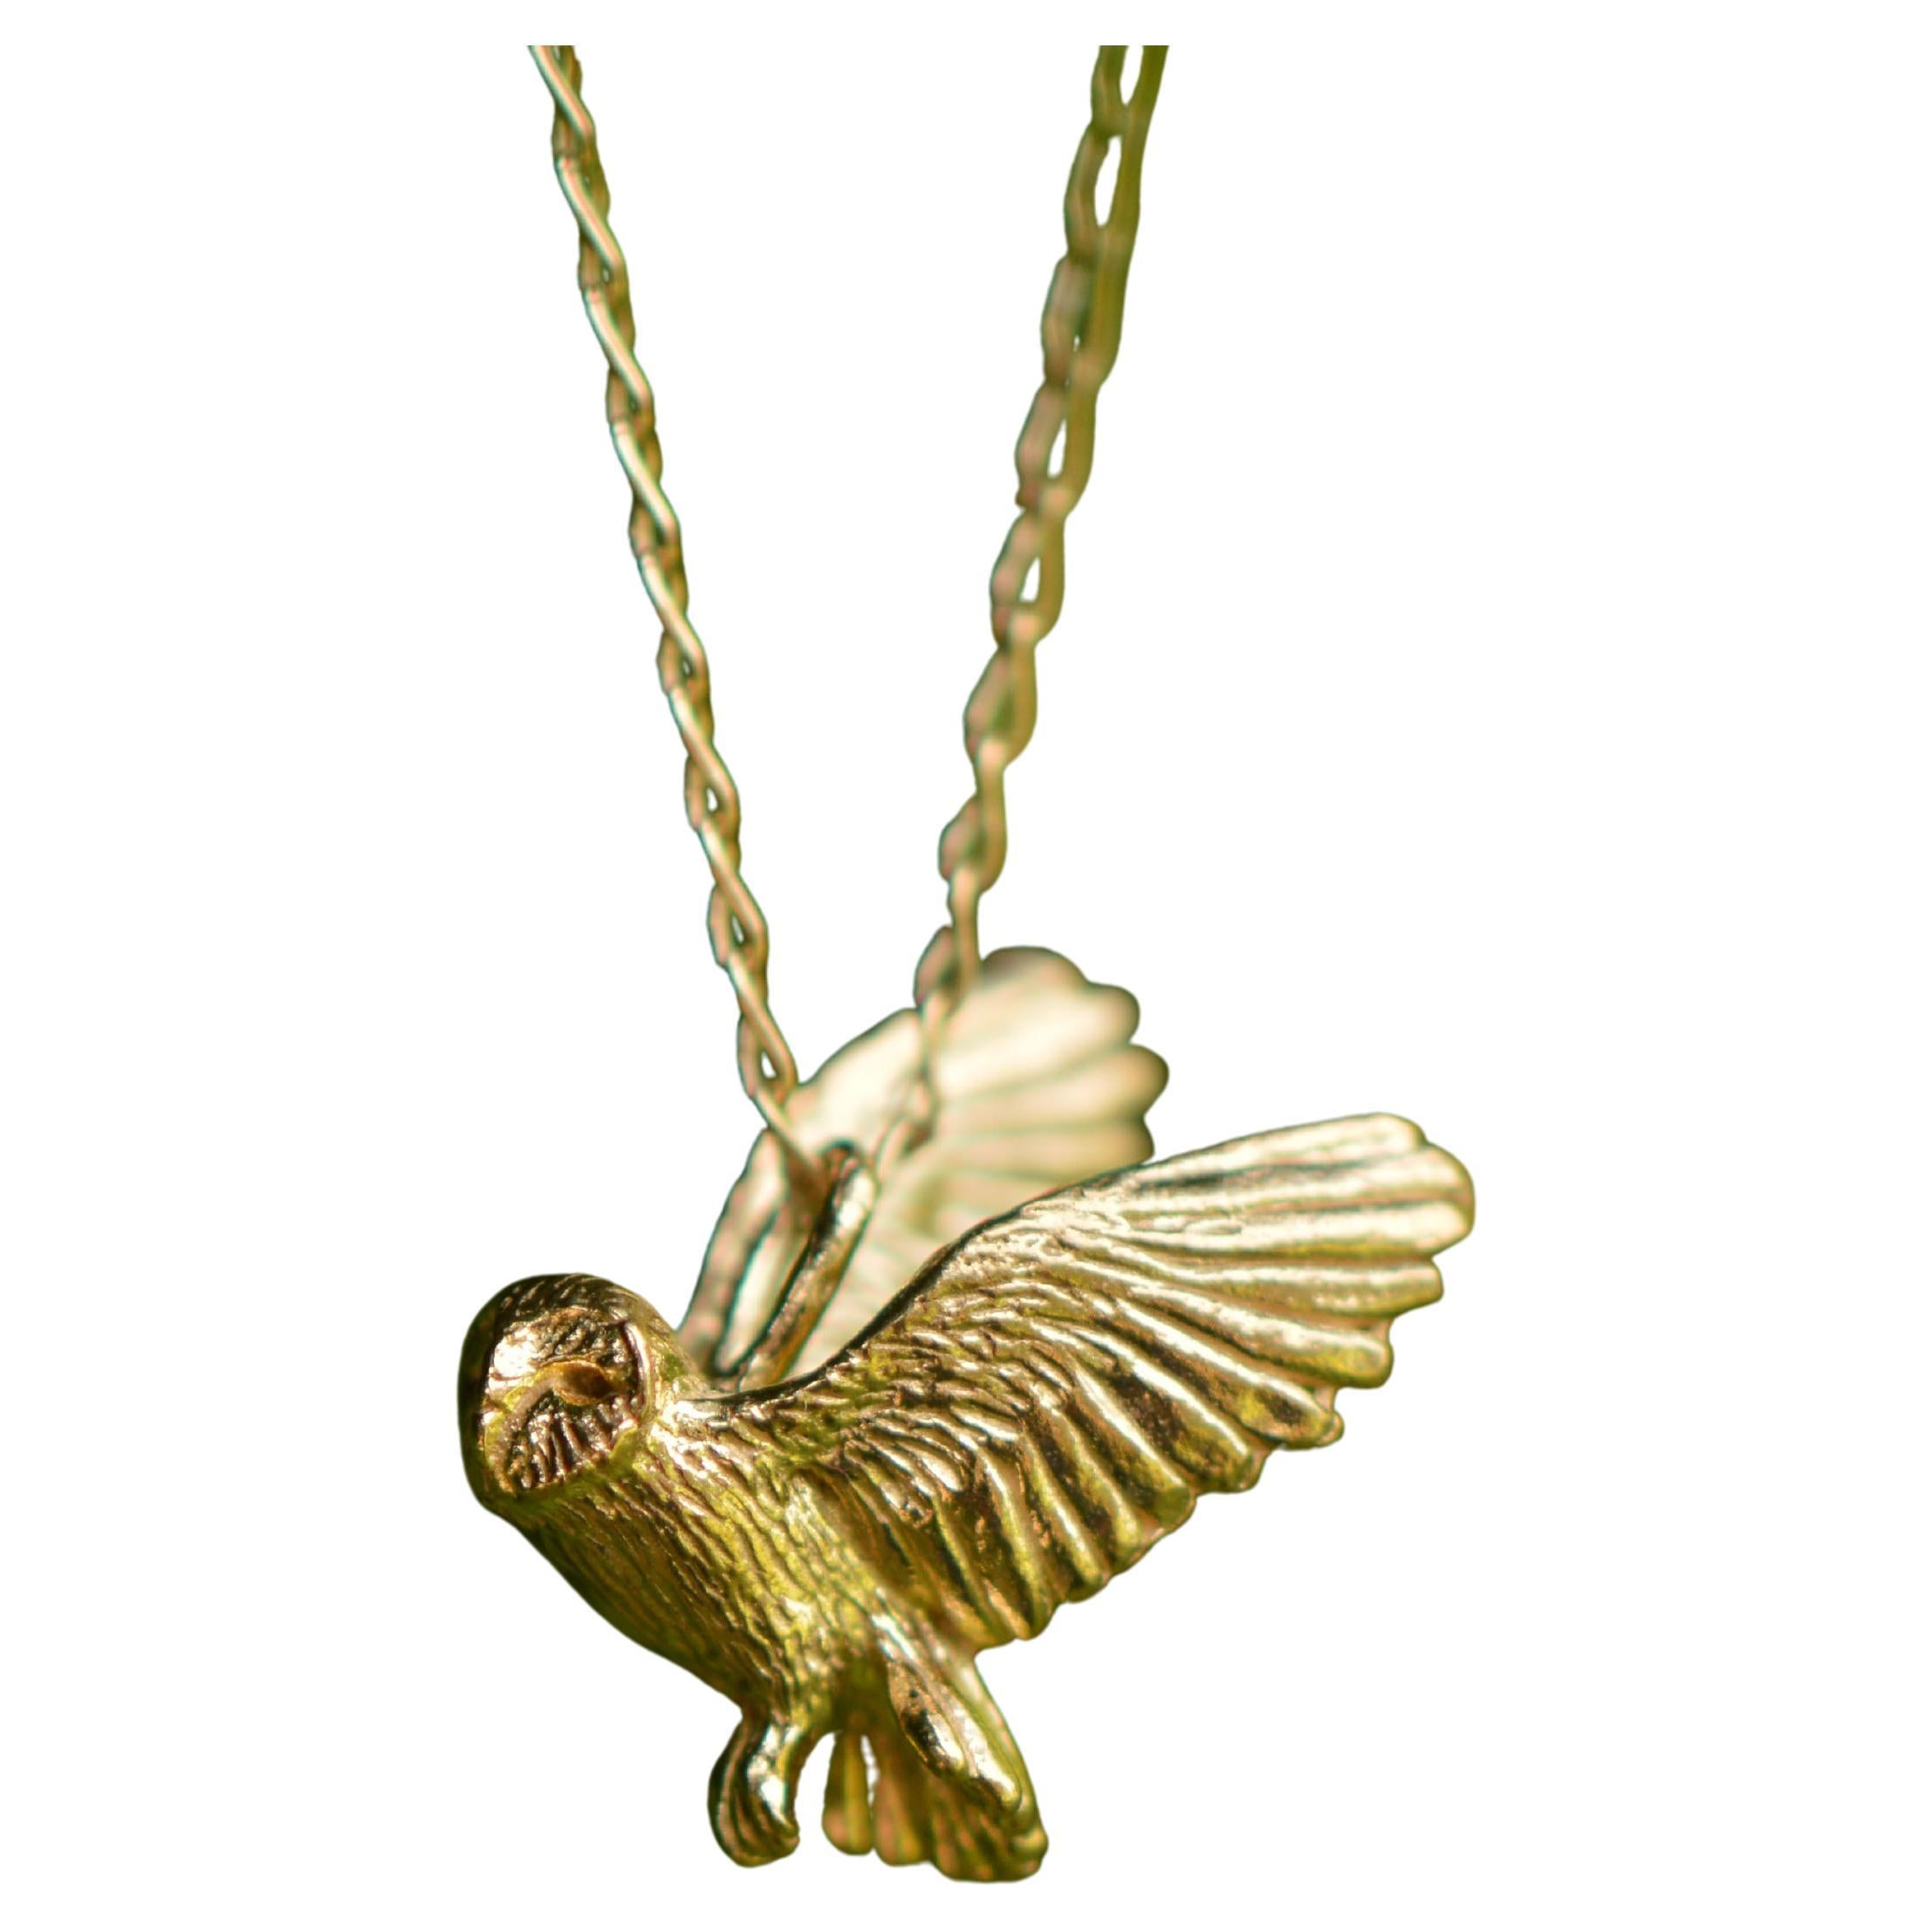 Solid 18 Carat Gold Flying Owl Pendant by Lucy Stopes-Roe